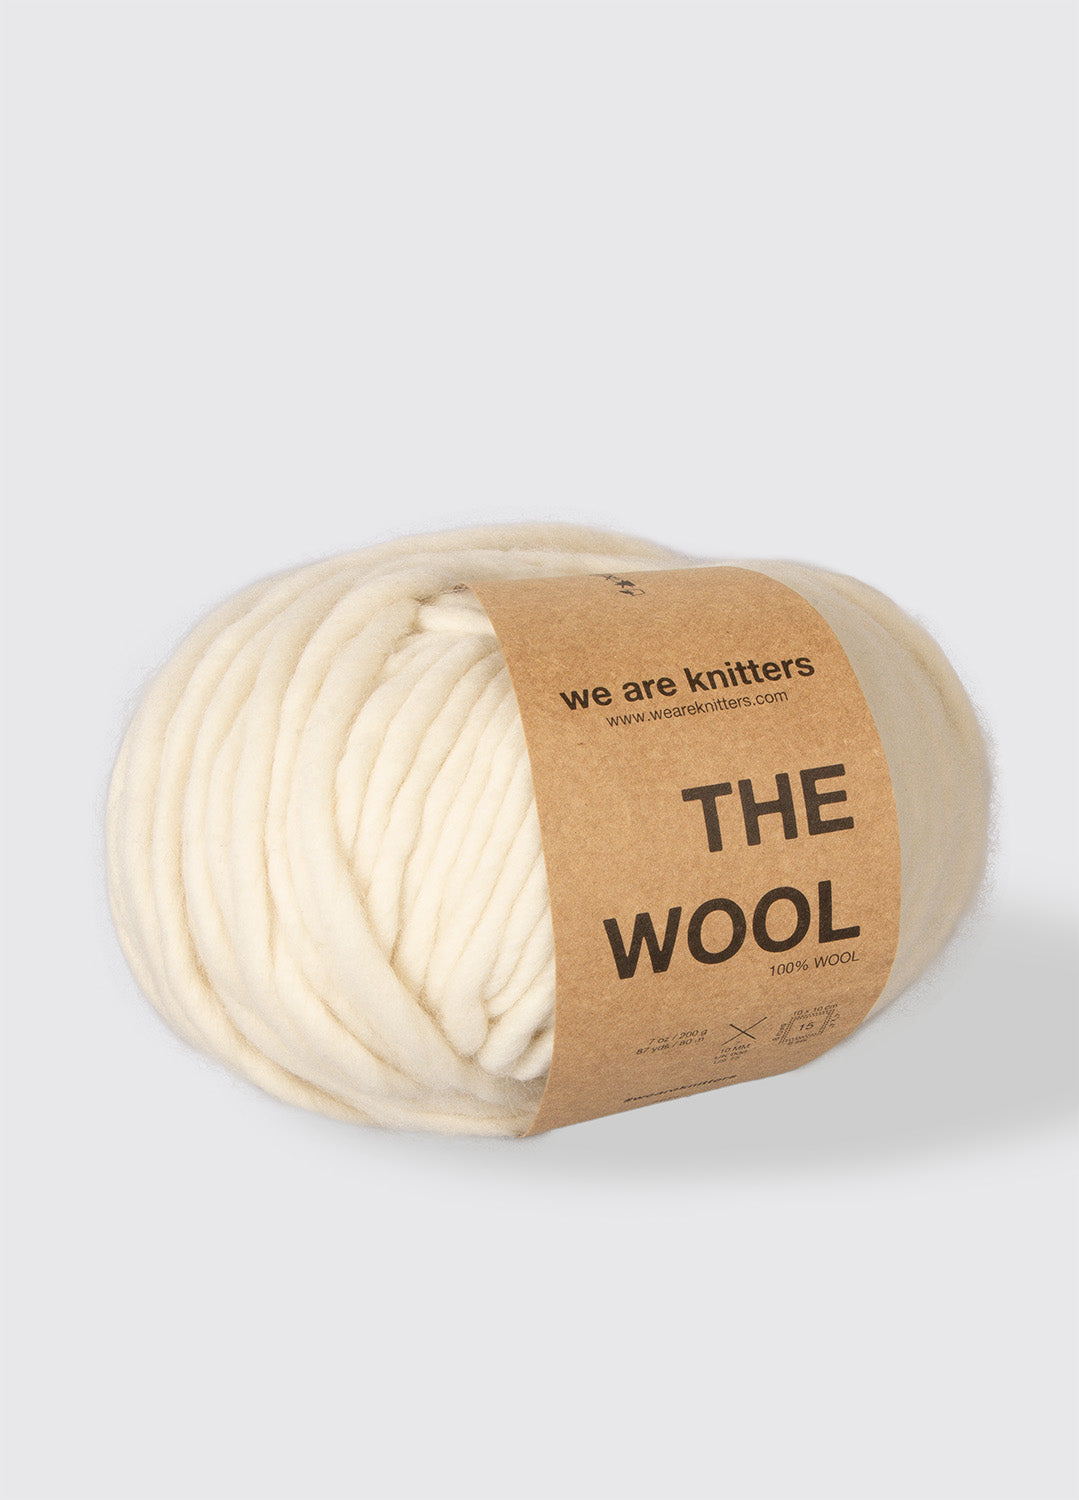 What does pure wool look like?